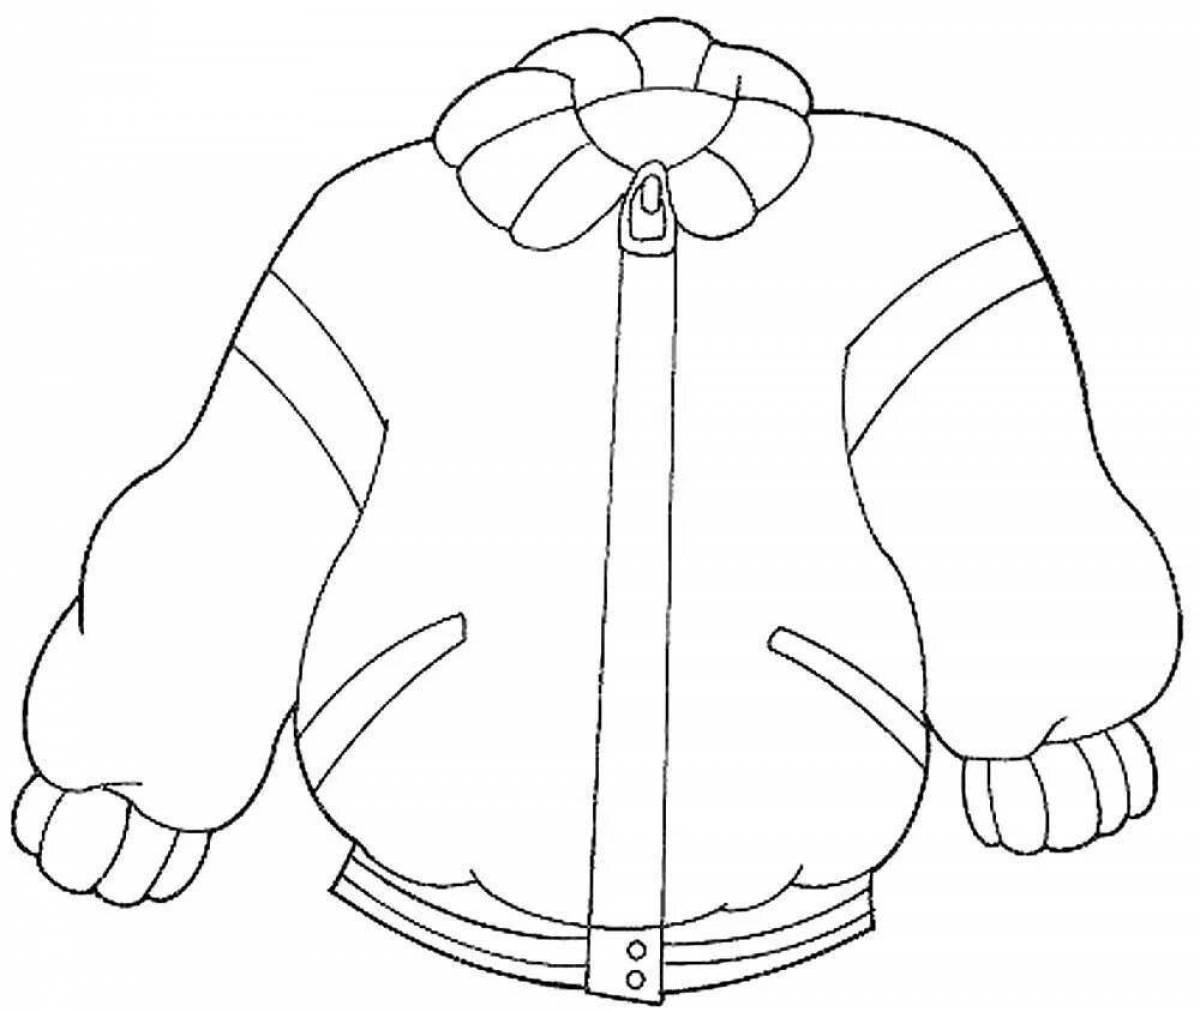 Fun jacket coloring for kids